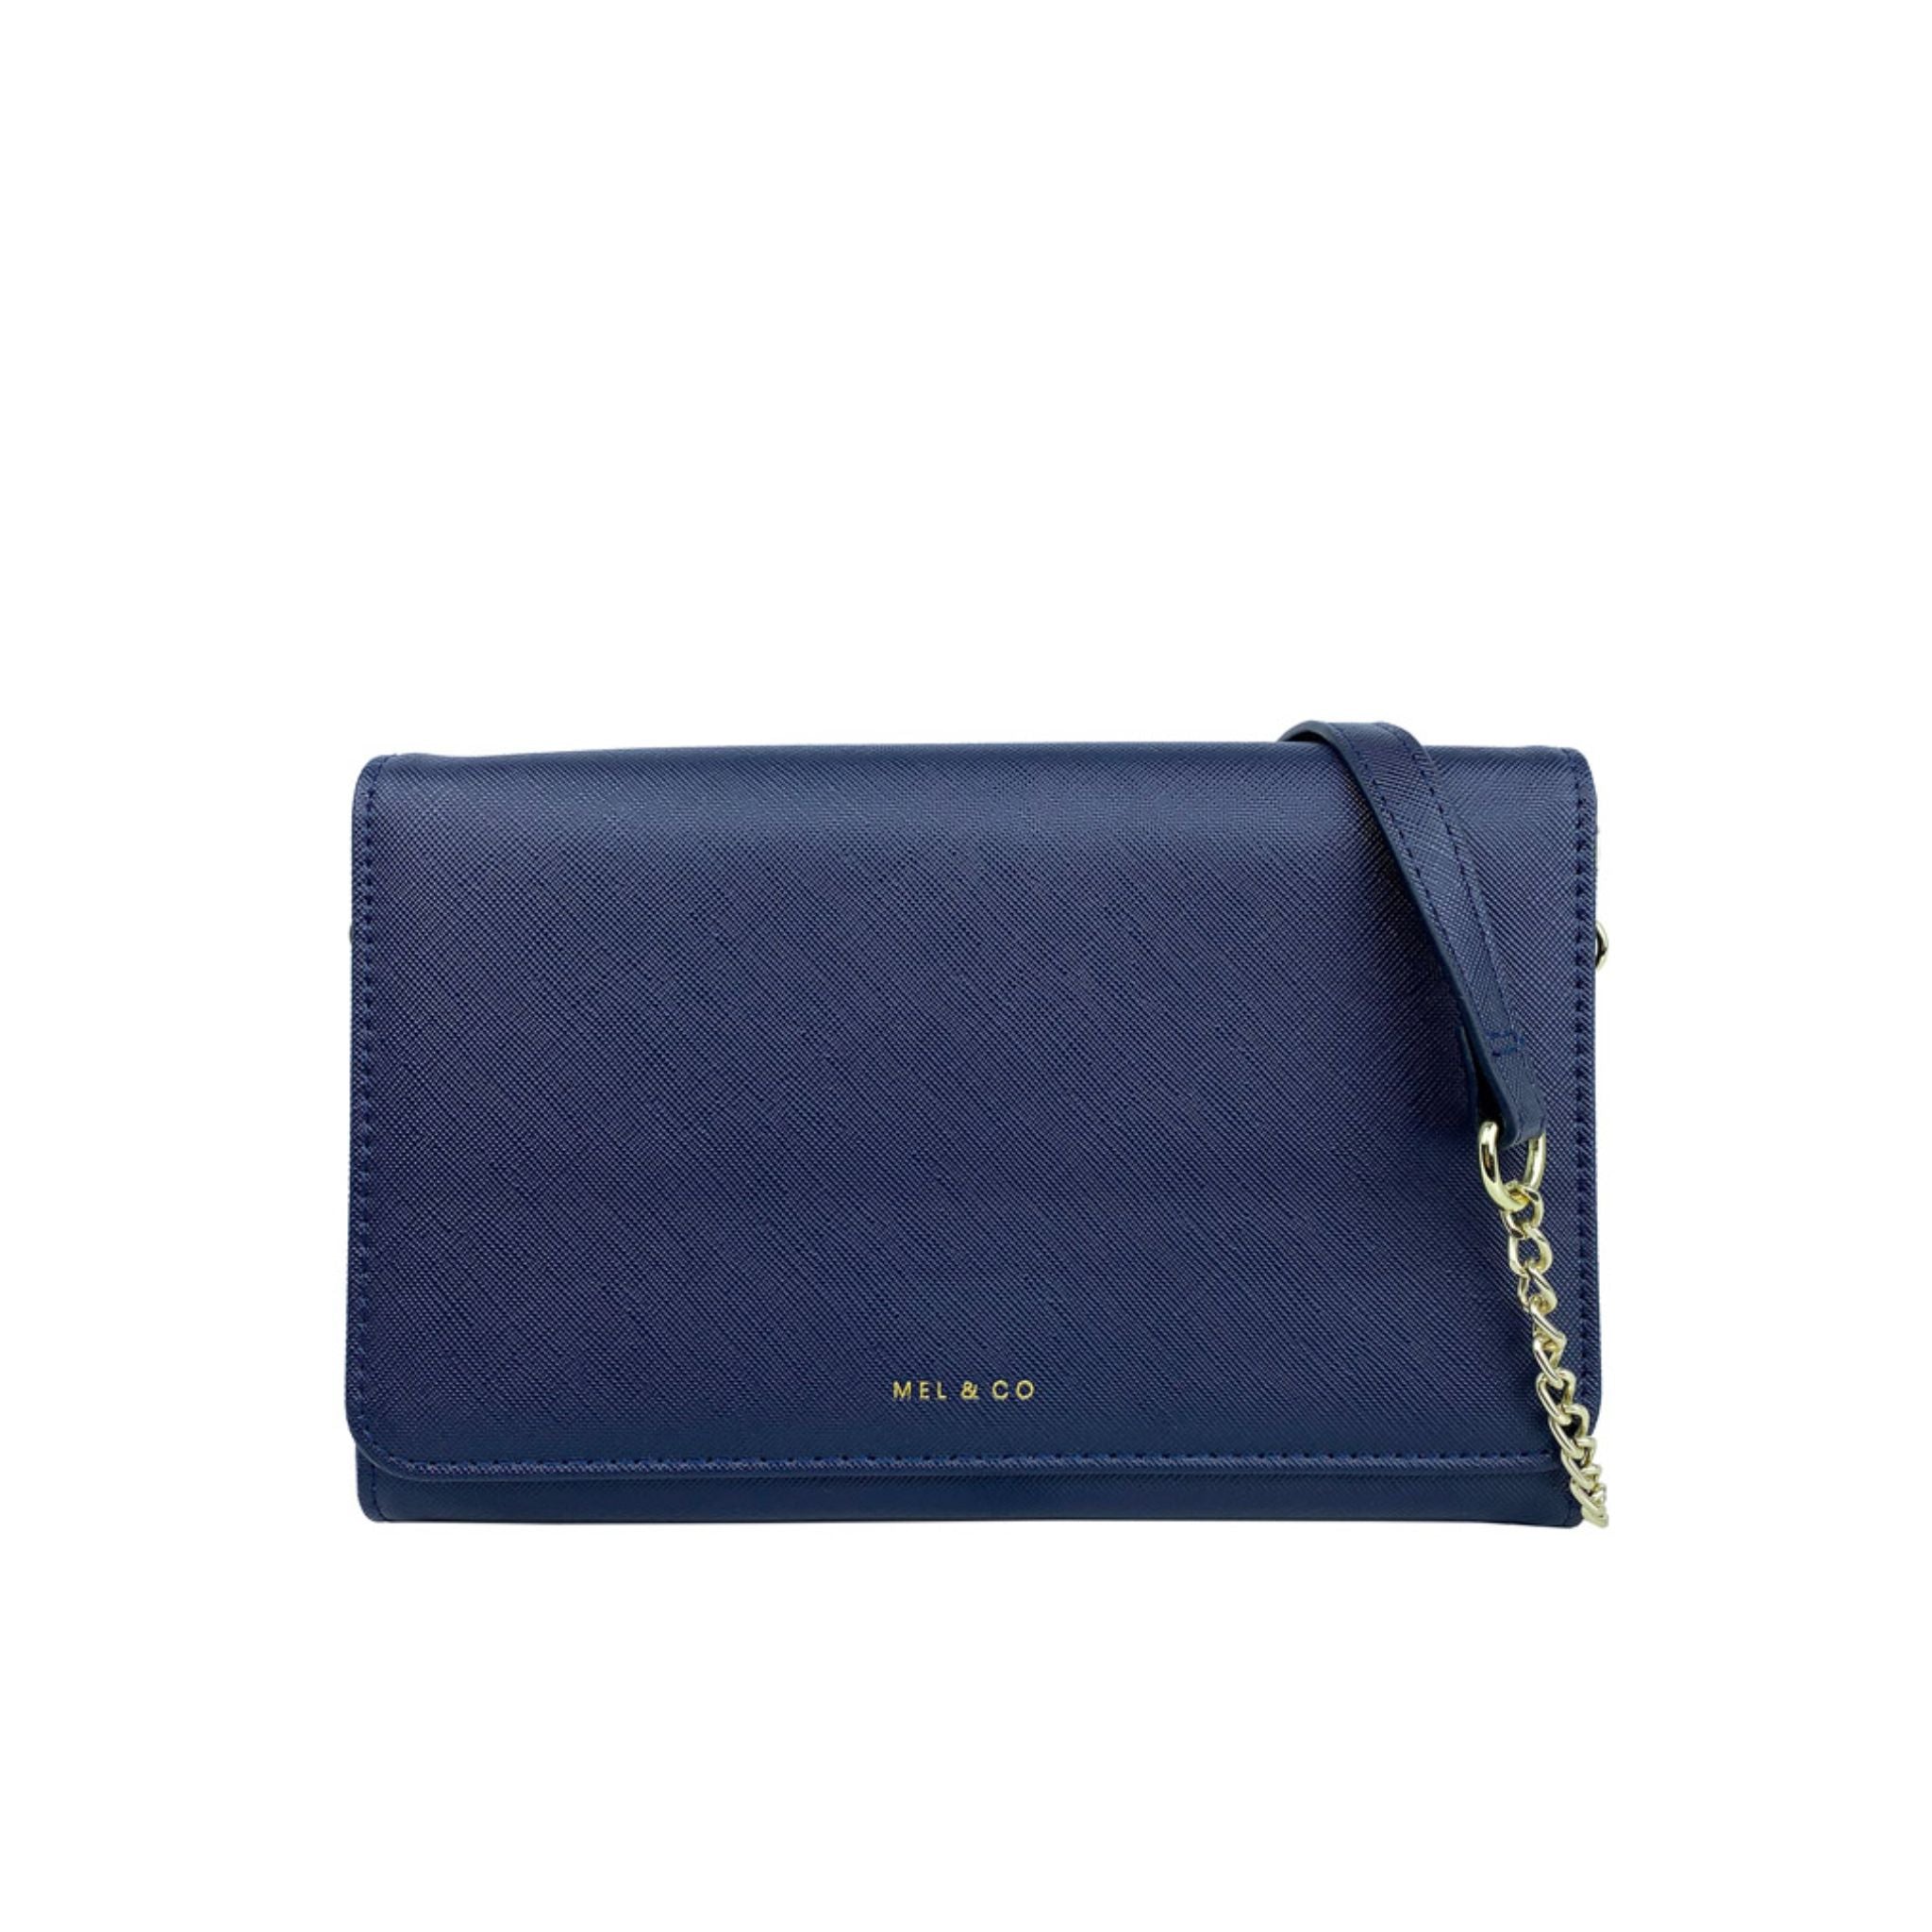 Mel&Co Saffiano-Effect Chain Wallet With Flap Compartment Navy